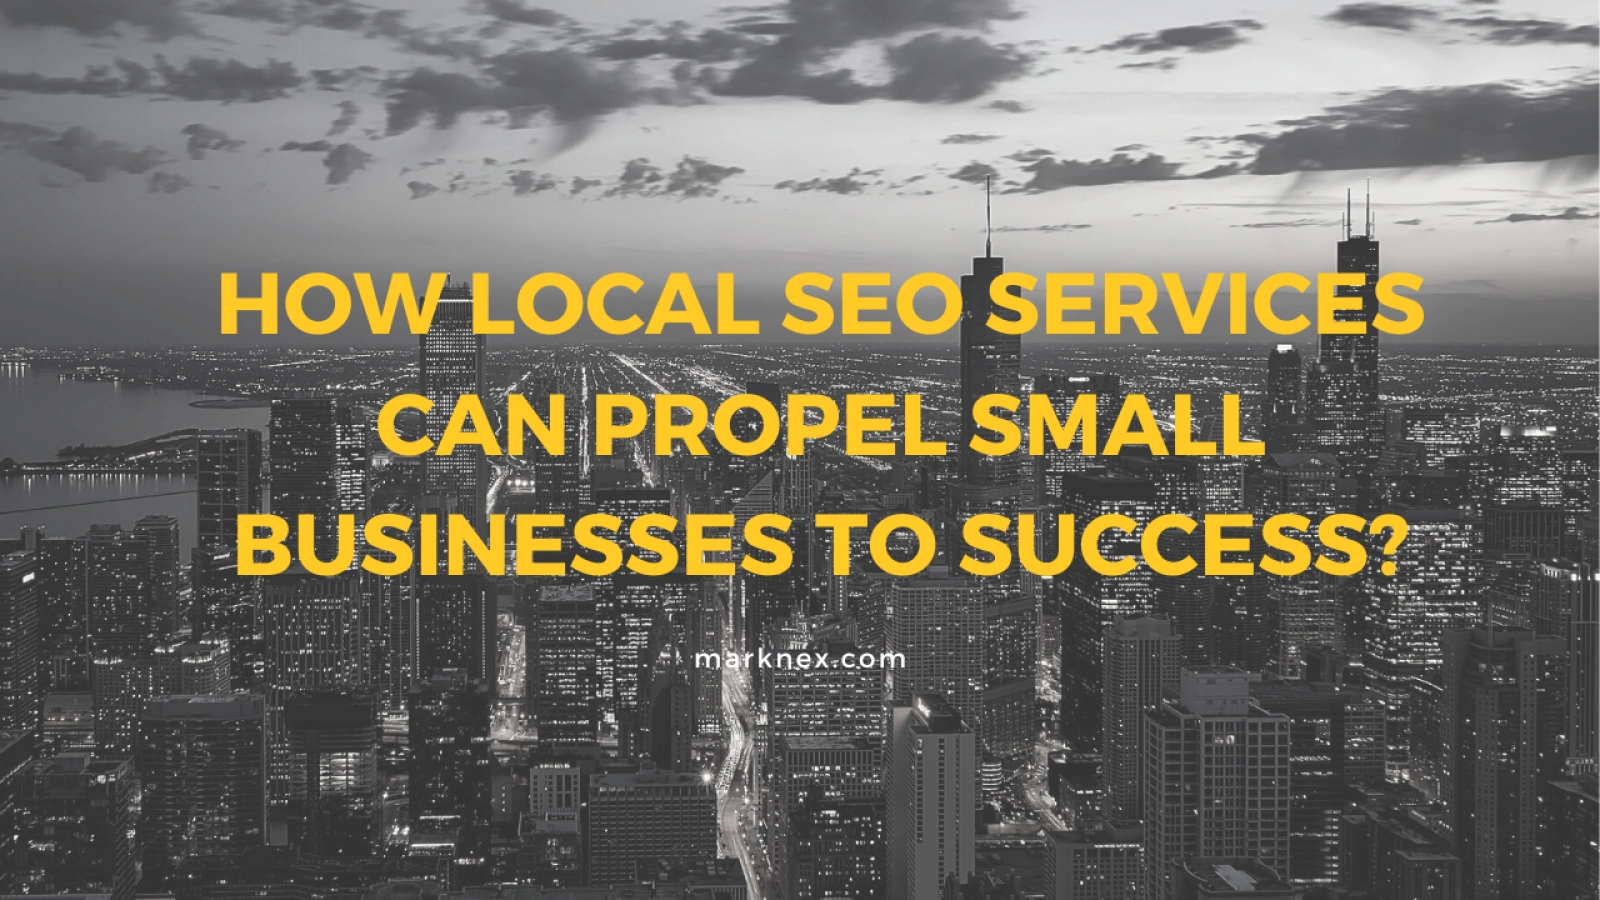 How Local SEO Services Can Propel Small Businesses to Success